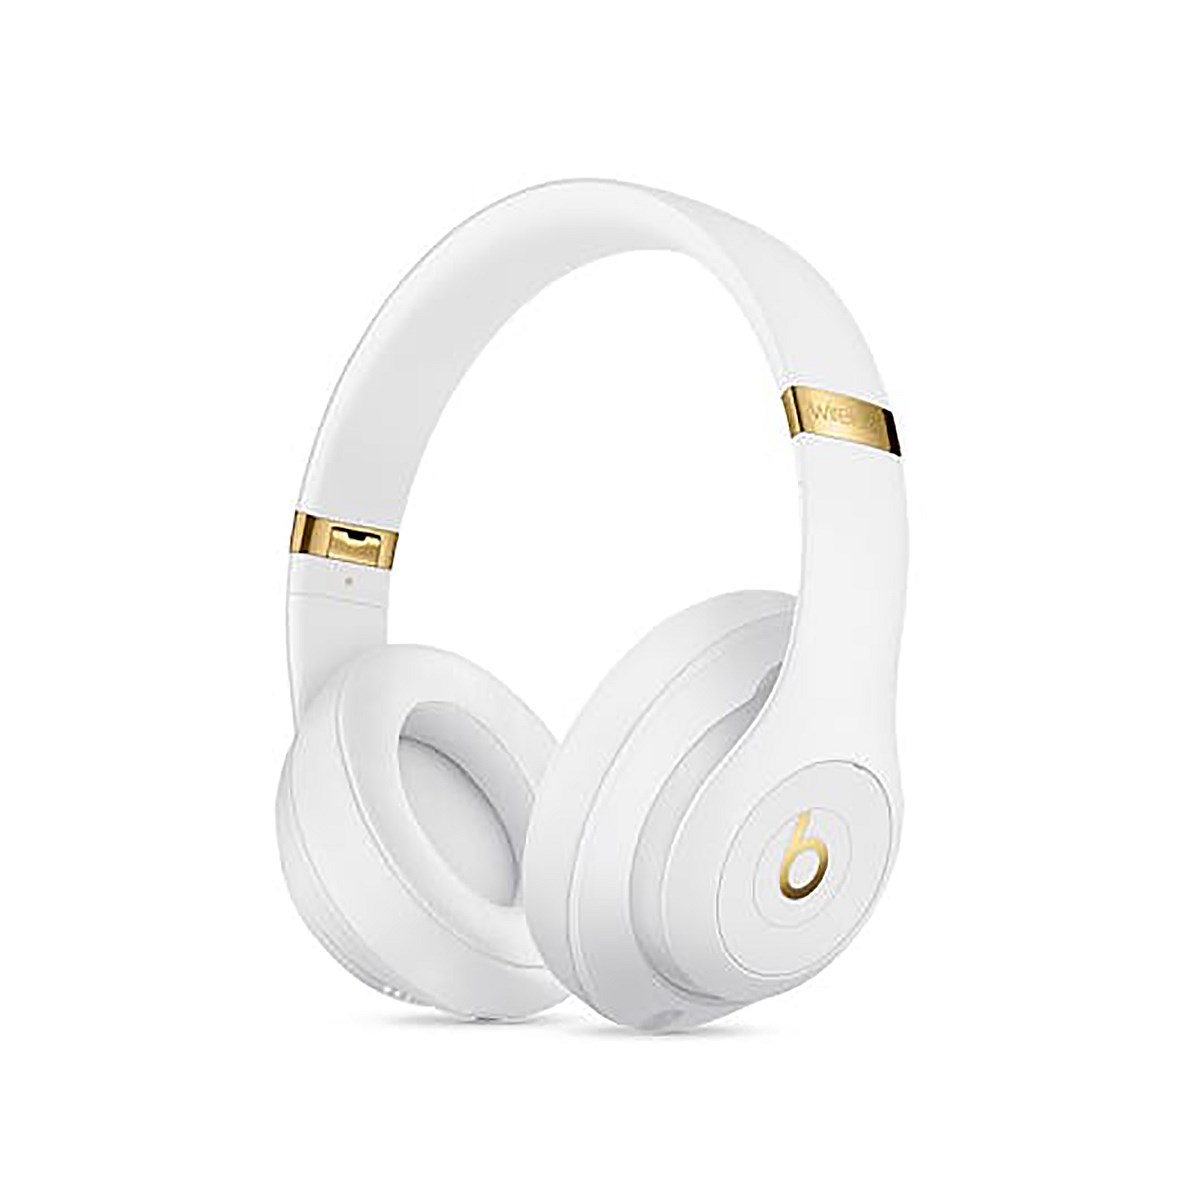 Beats by Dre Online | Air New Zealand's 